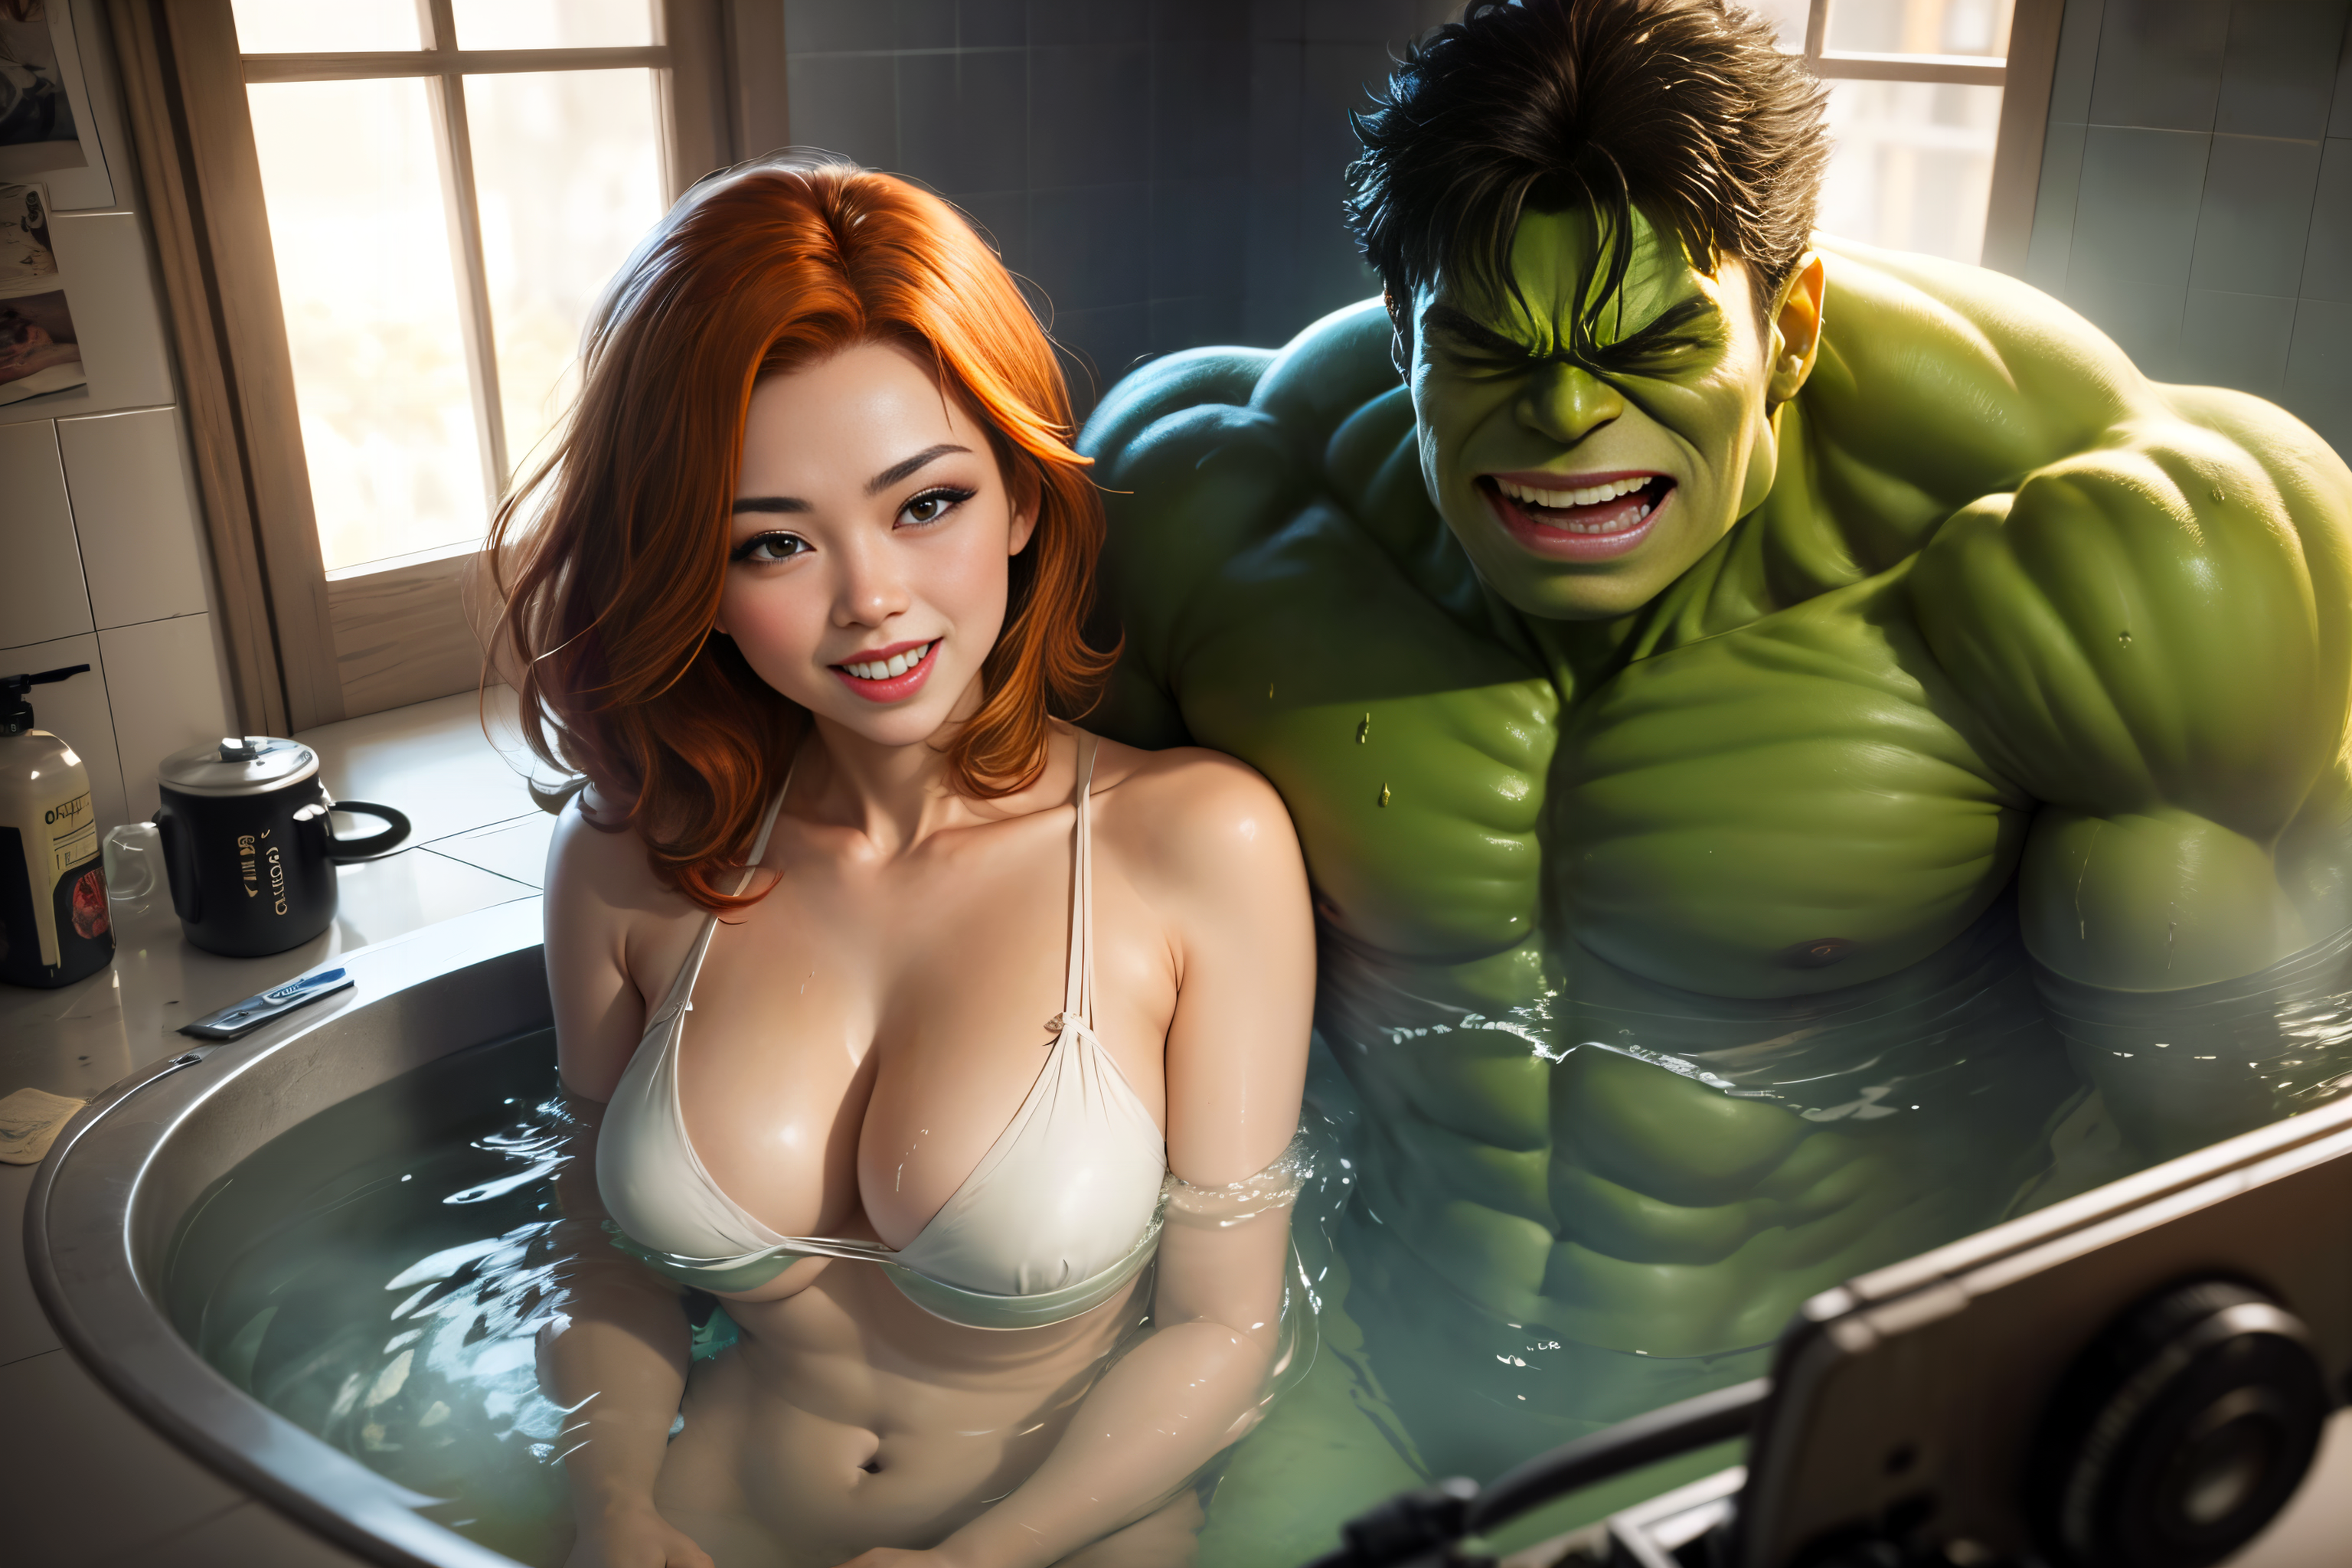 General 3072x2048 Hulk The Incredible Hulk Marvel Comics Marvel Avengers Marvel Super Heroes boobs neckline swimming pool whirlpool water muscles AI art photoshopped women looking at viewer Asian in water superhero open mouth phone smiling